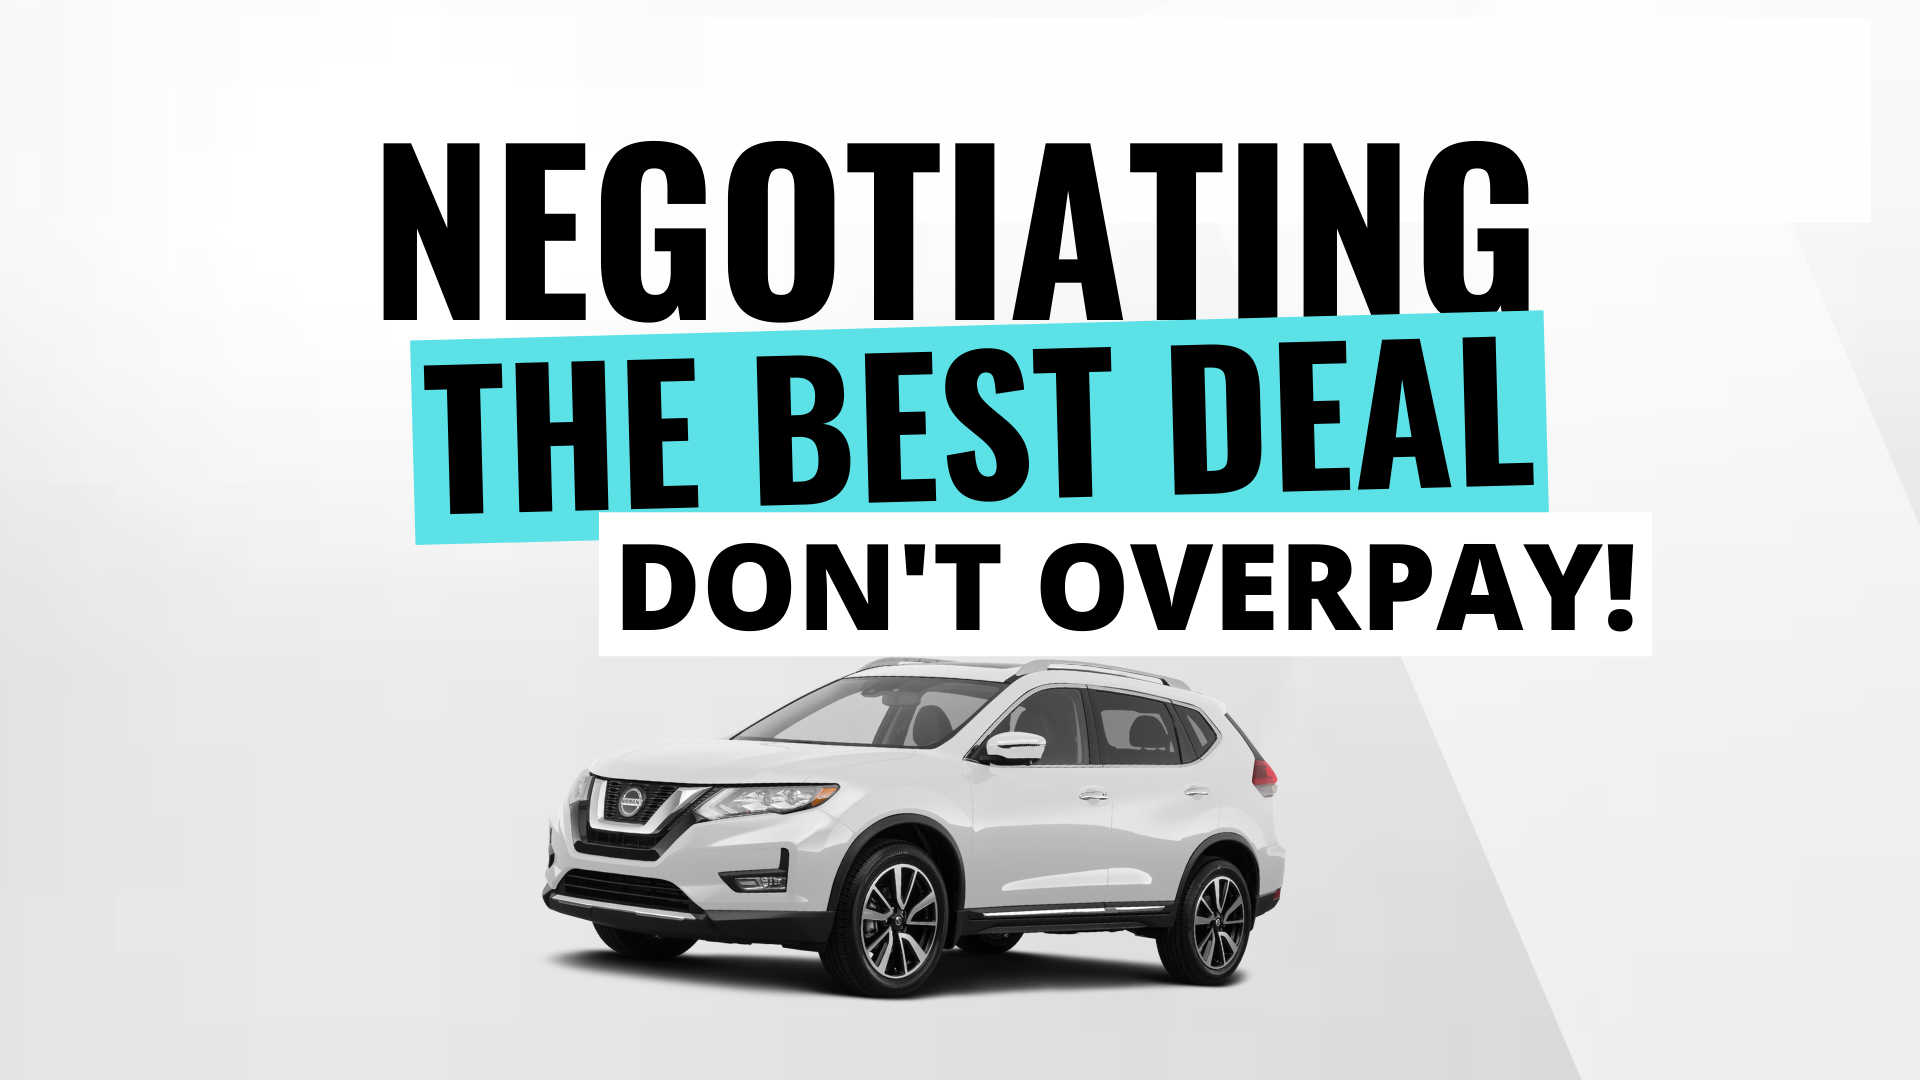 How to Negotiate The Best Deal